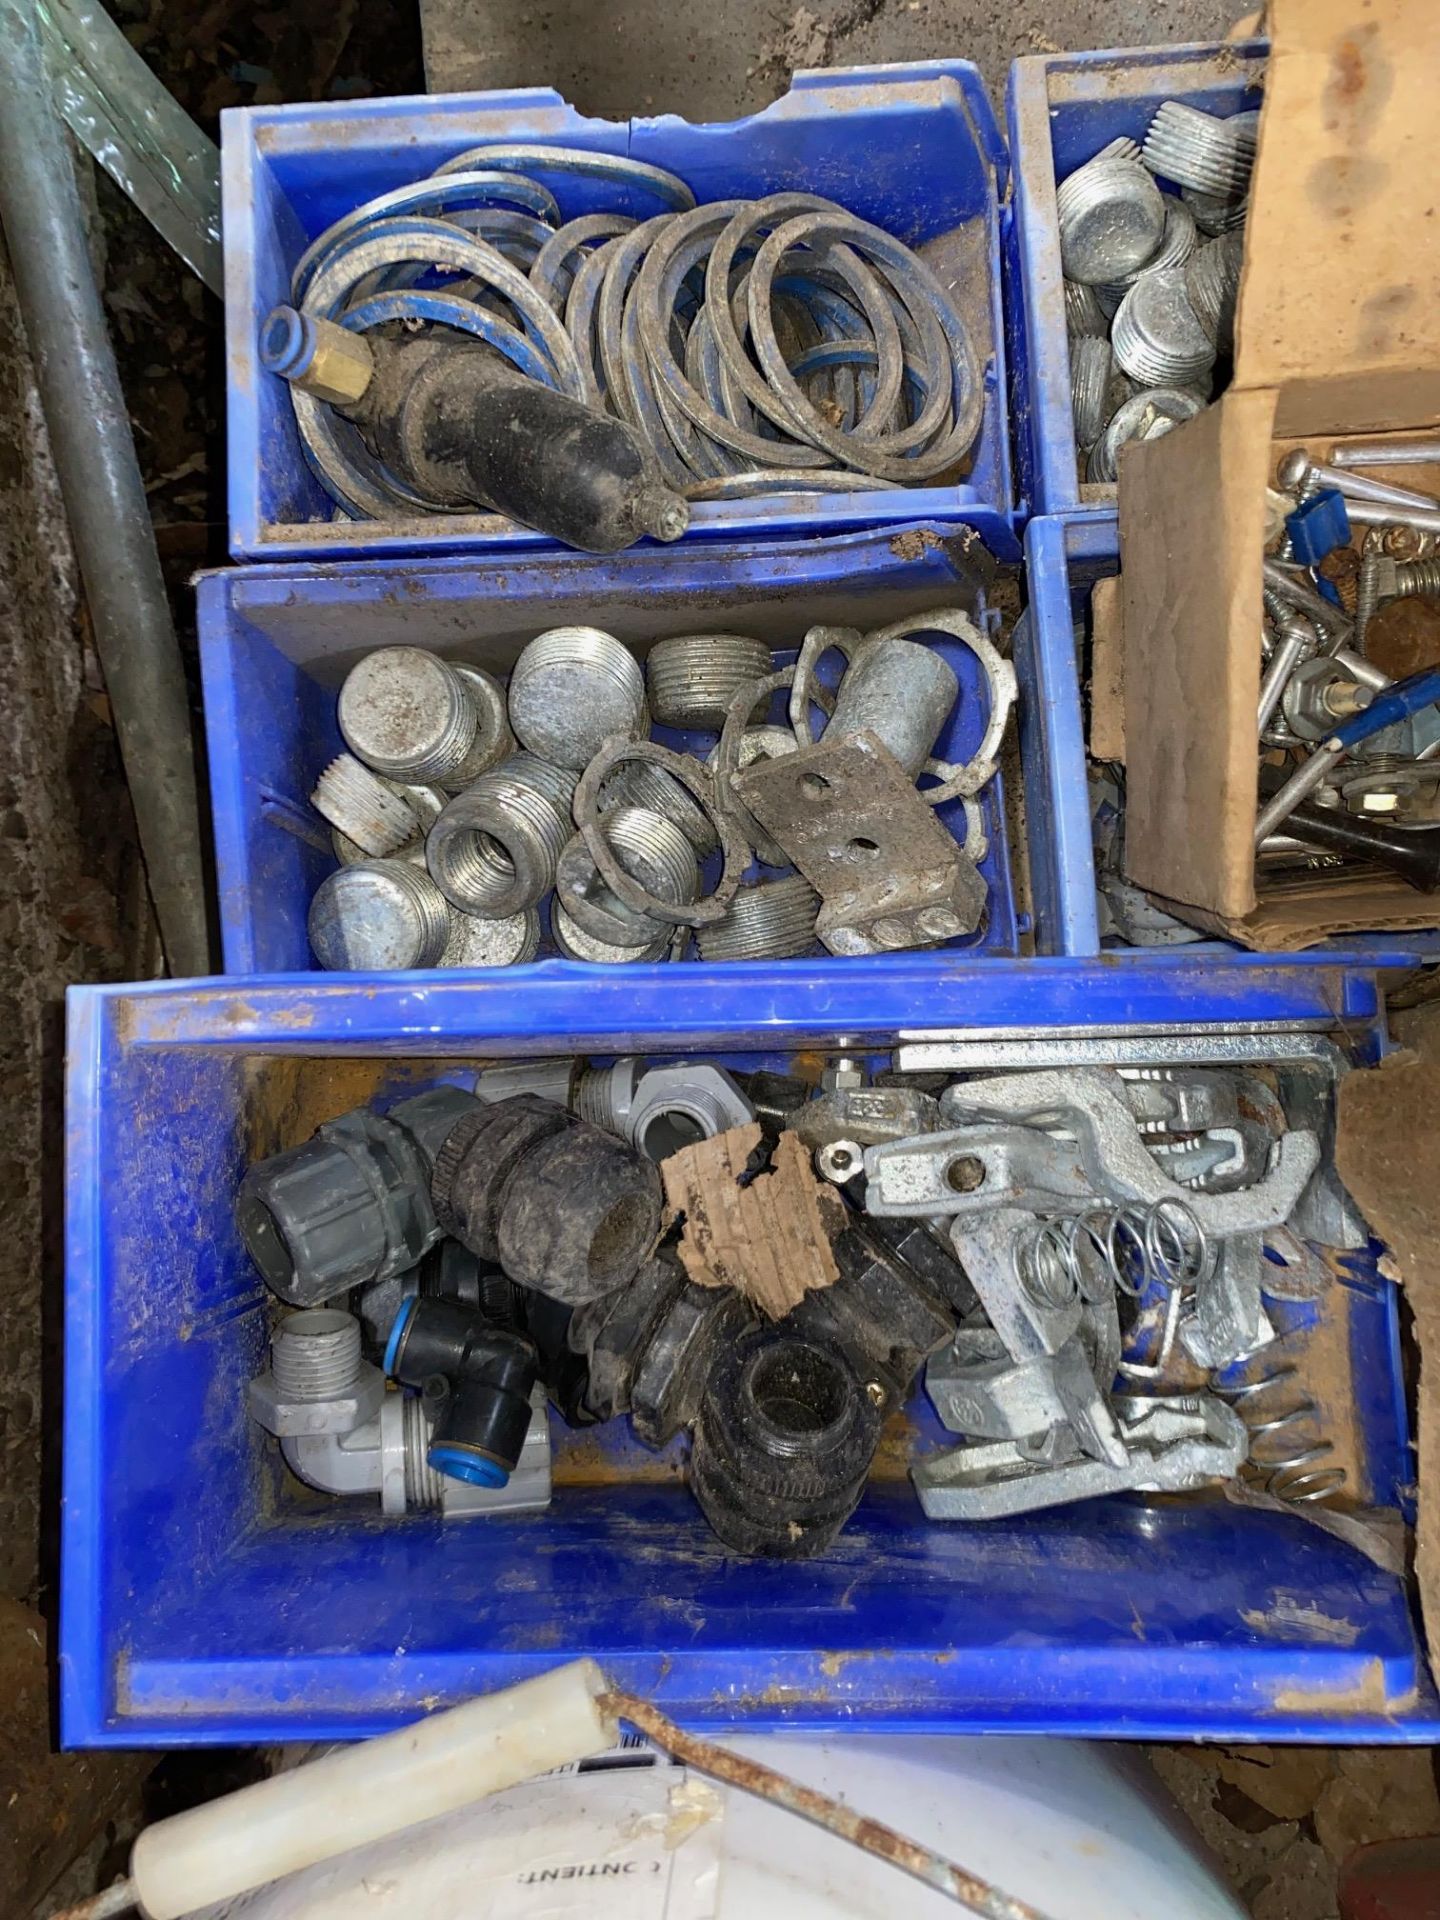 LOT OF ASSORTED HARDWARE AND PAIL OF RIVETS - Image 6 of 8